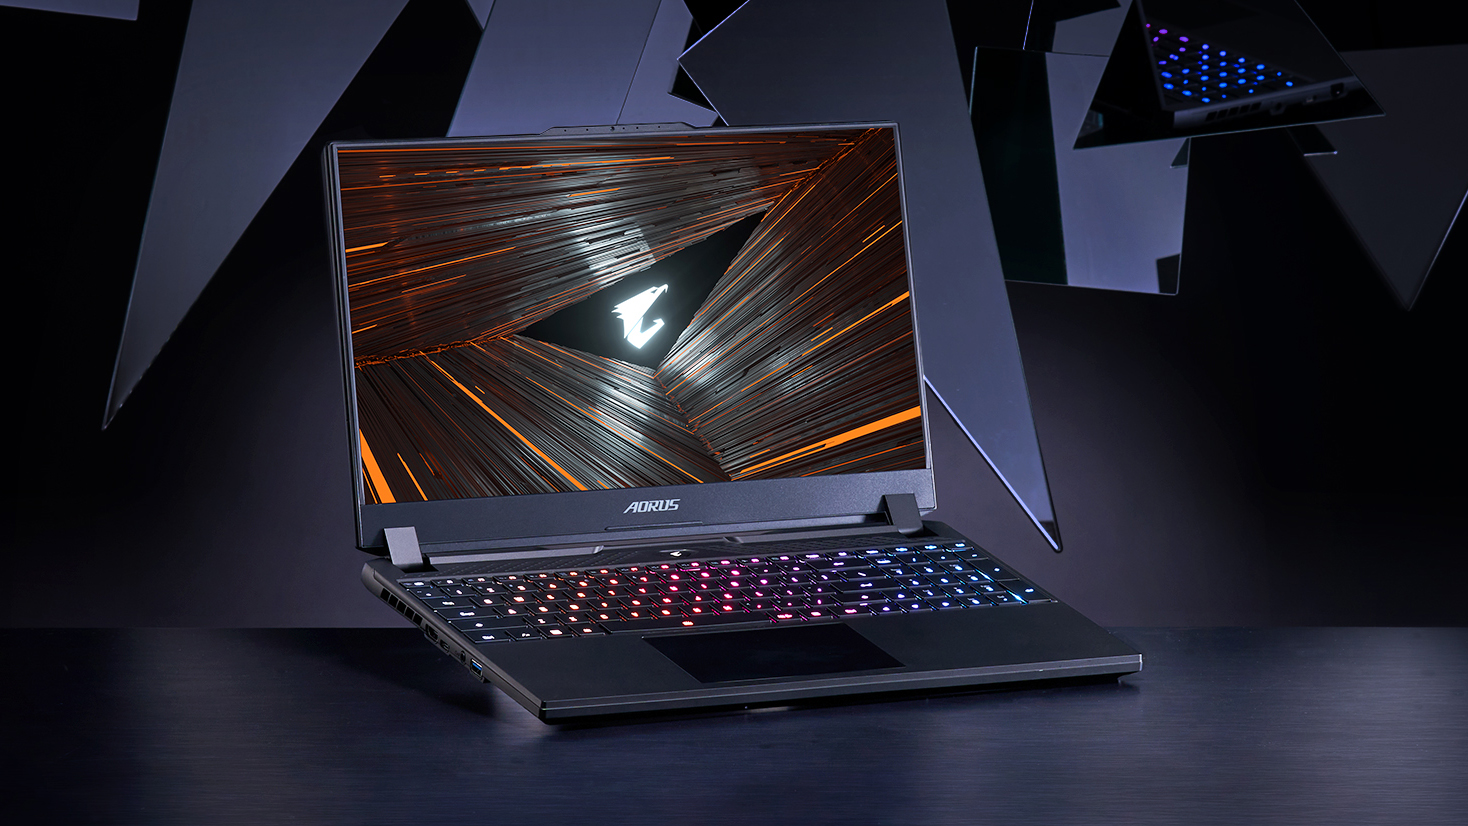  Gigabyte’s New Aorus 15 XE4 Offers Some Powerful Upgrades 